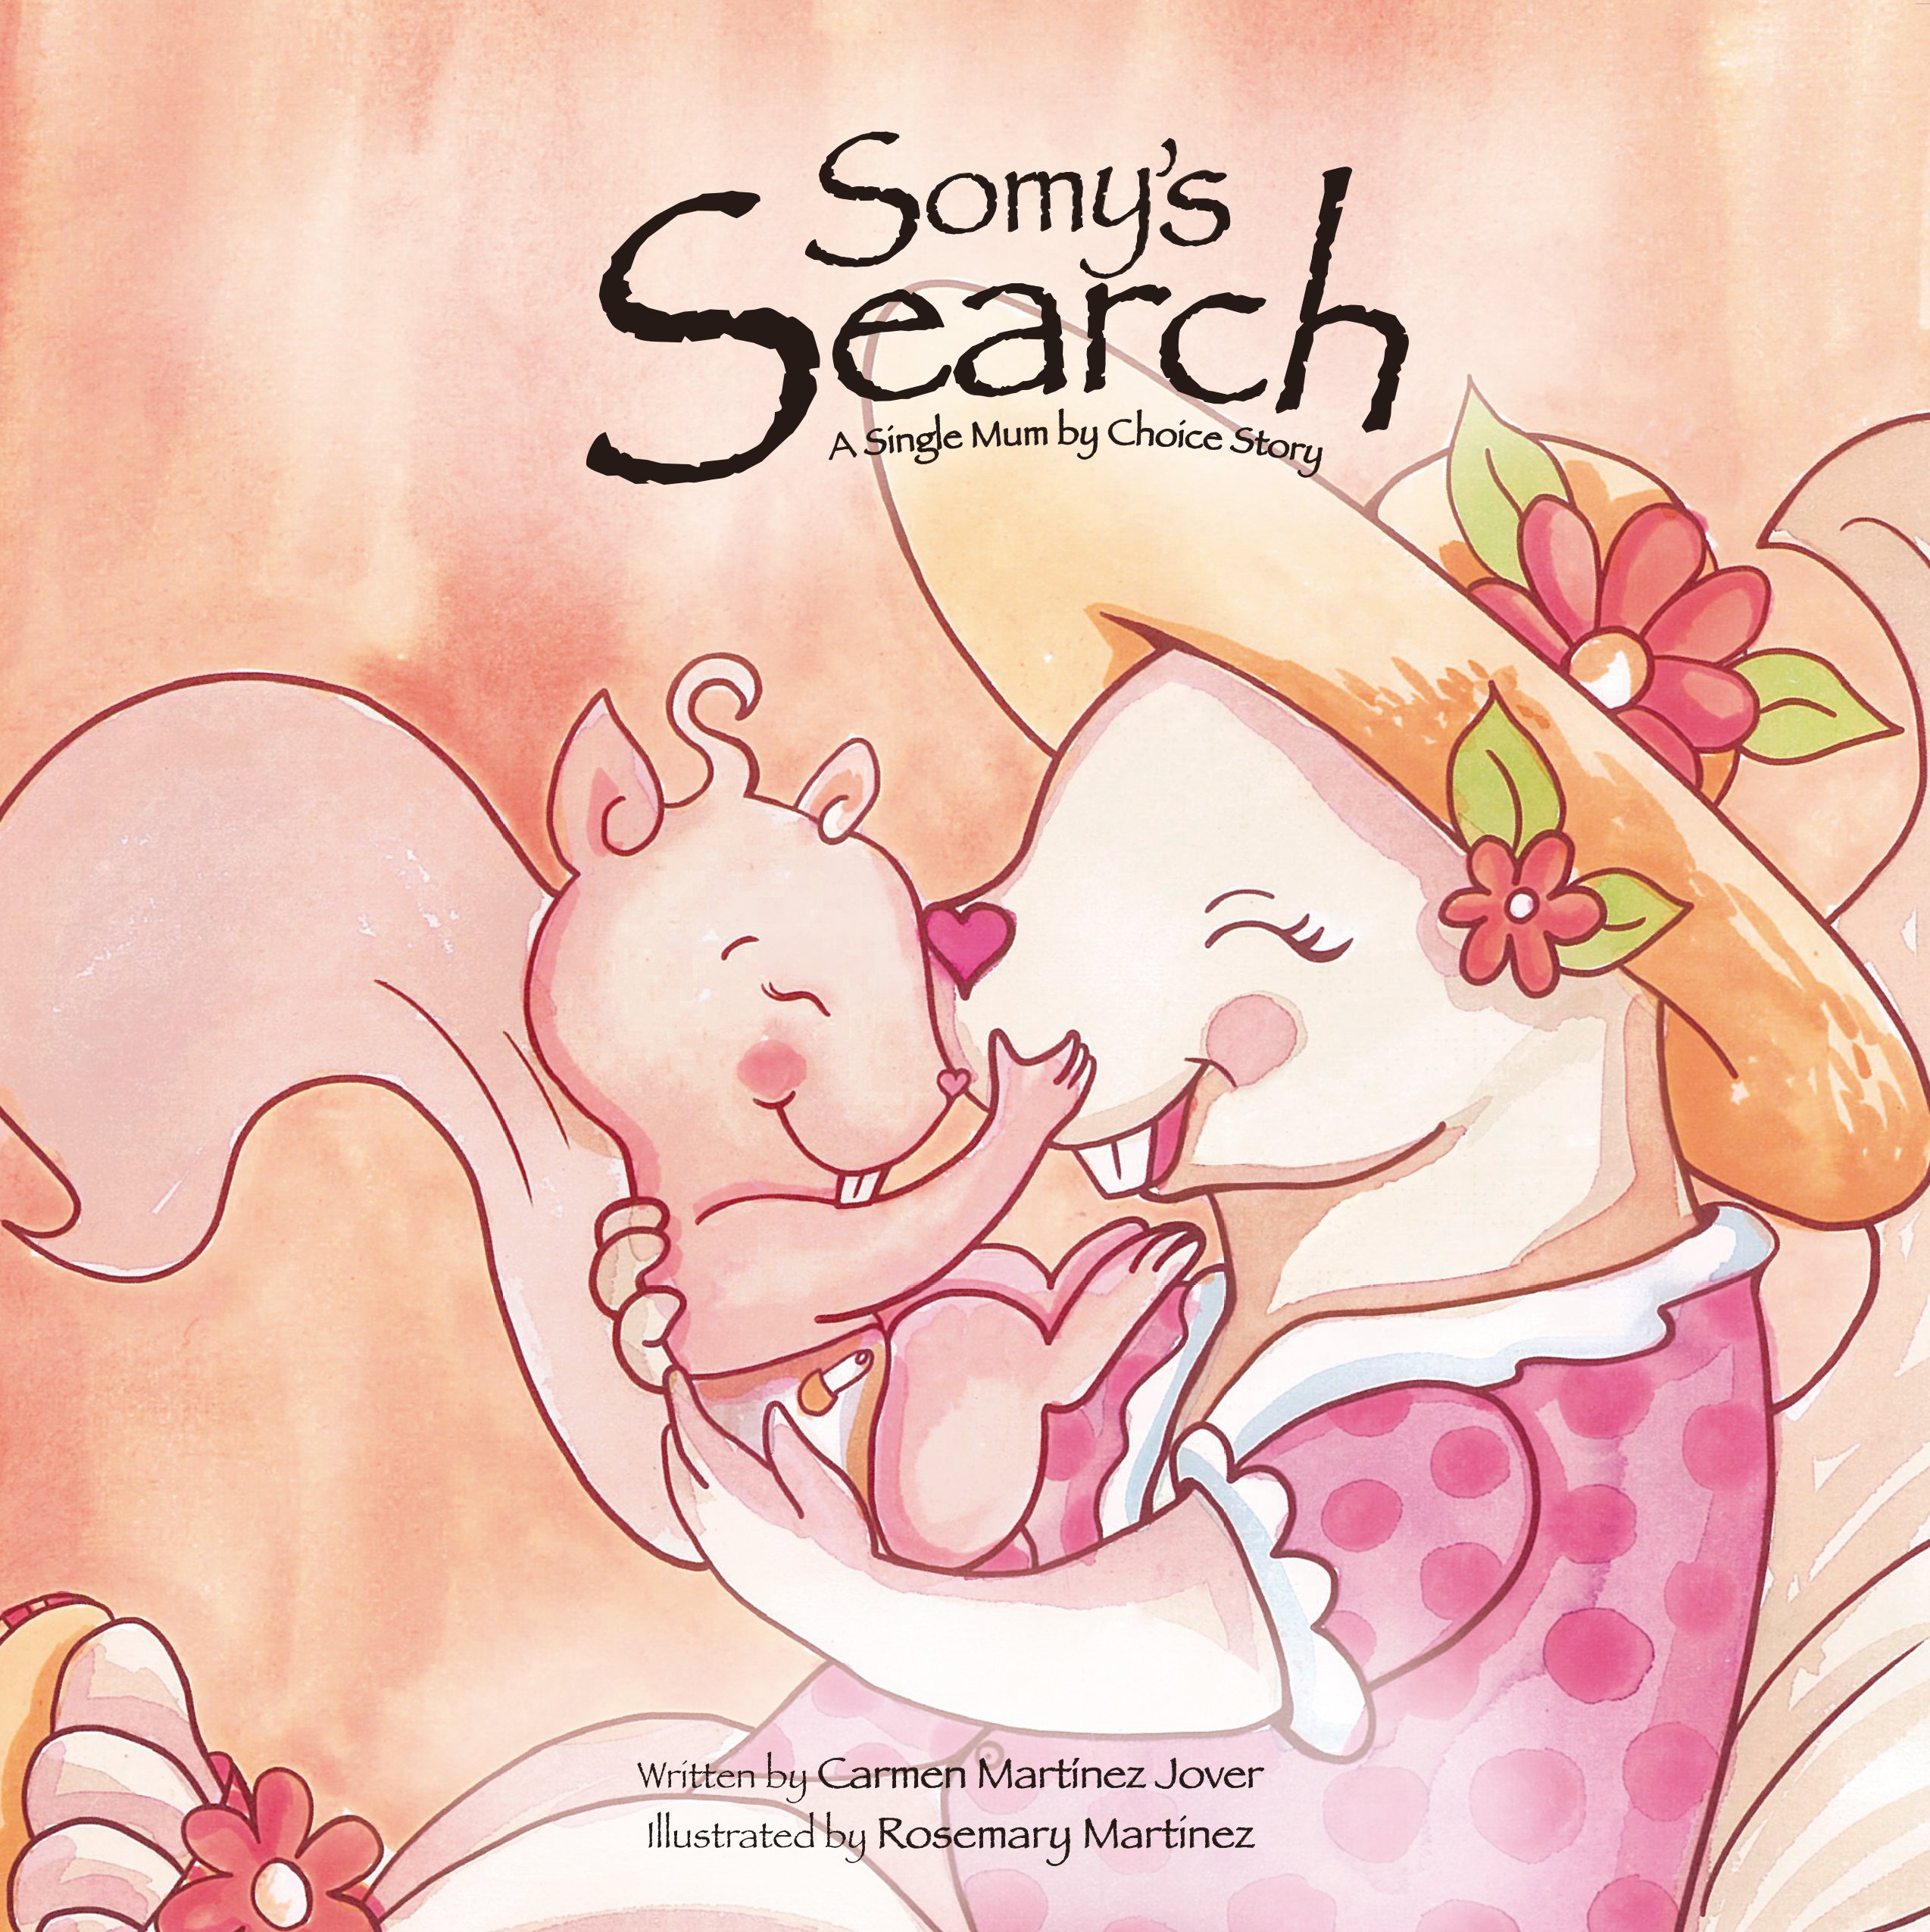 SOMY'S SEARCH, a single Mum by choice story